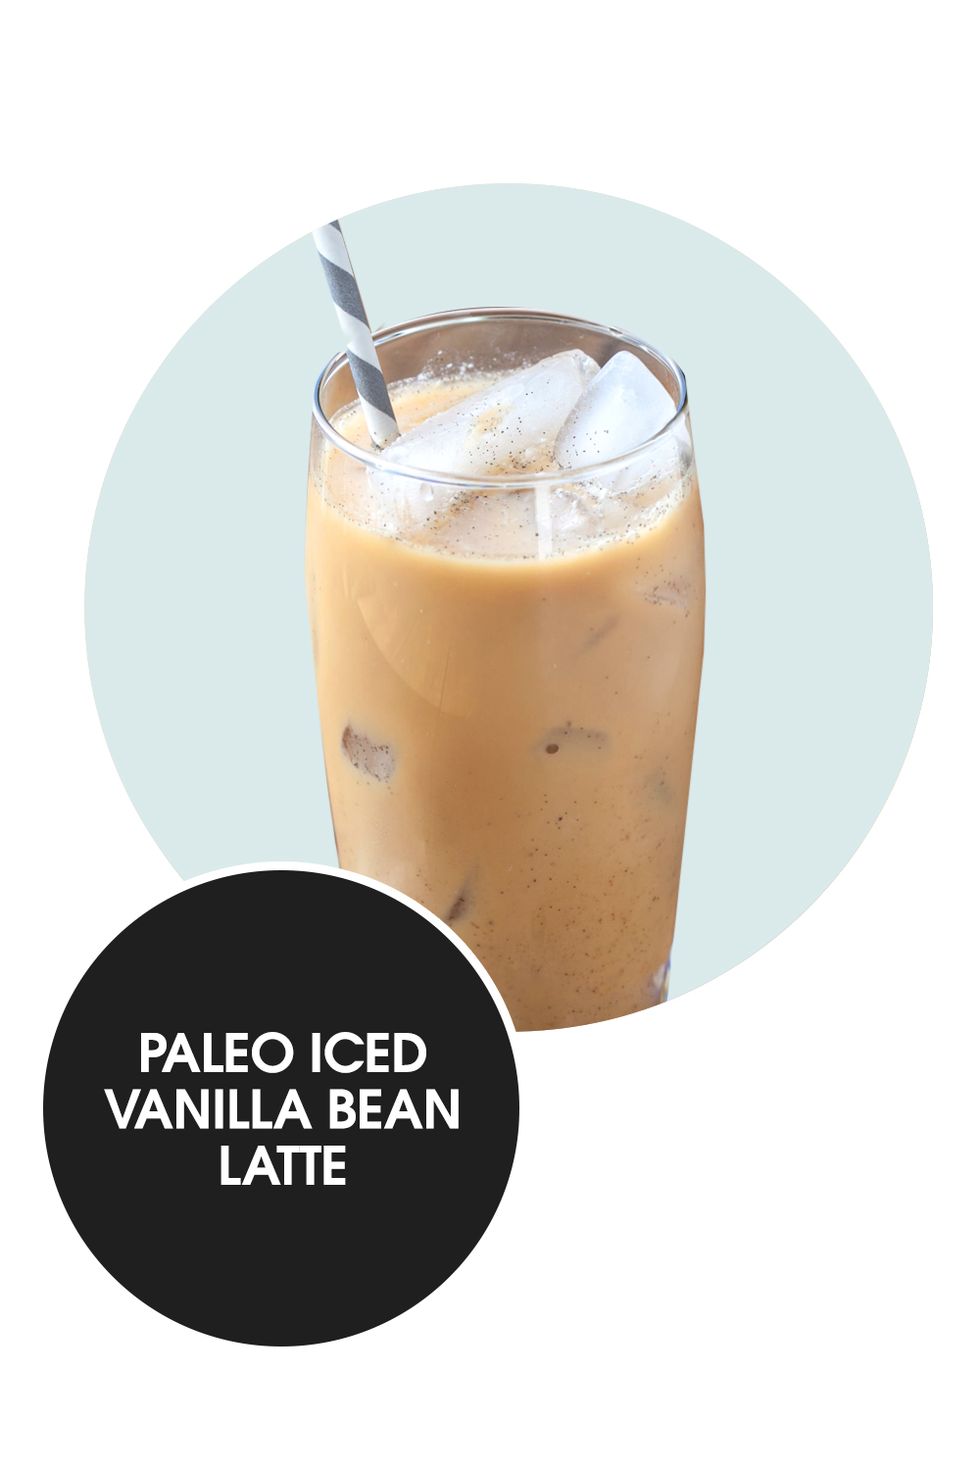 This morning brew is free of gluten and refined sugars, but it still boasts great flavor from the vanilla beans, maple syrup, and ground cinnamon.

<strong>Get the recipe at </strong><strong><a target="_blank" href="http://againstallgrain.com/2013/03/27/iced-vanilla-bean-latte/">Against All Grain</a>.</strong>